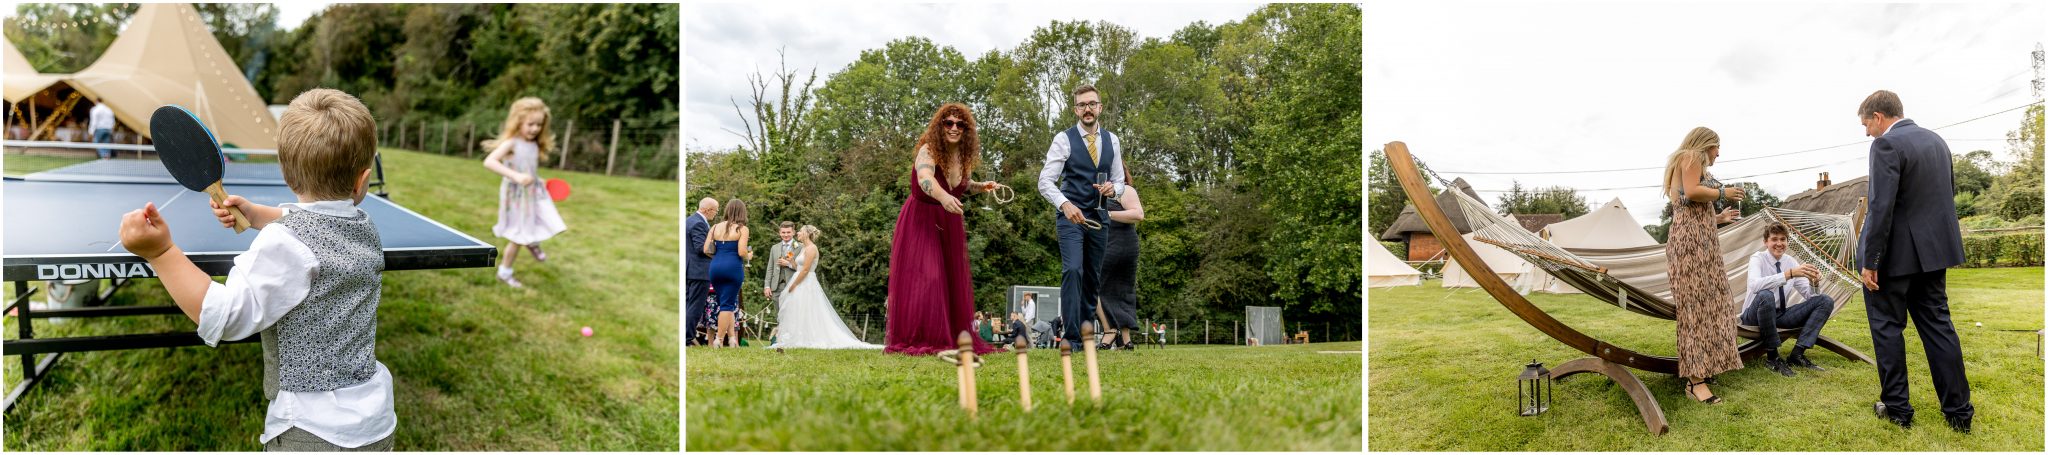 Garden games and a hammock for the wedding guests